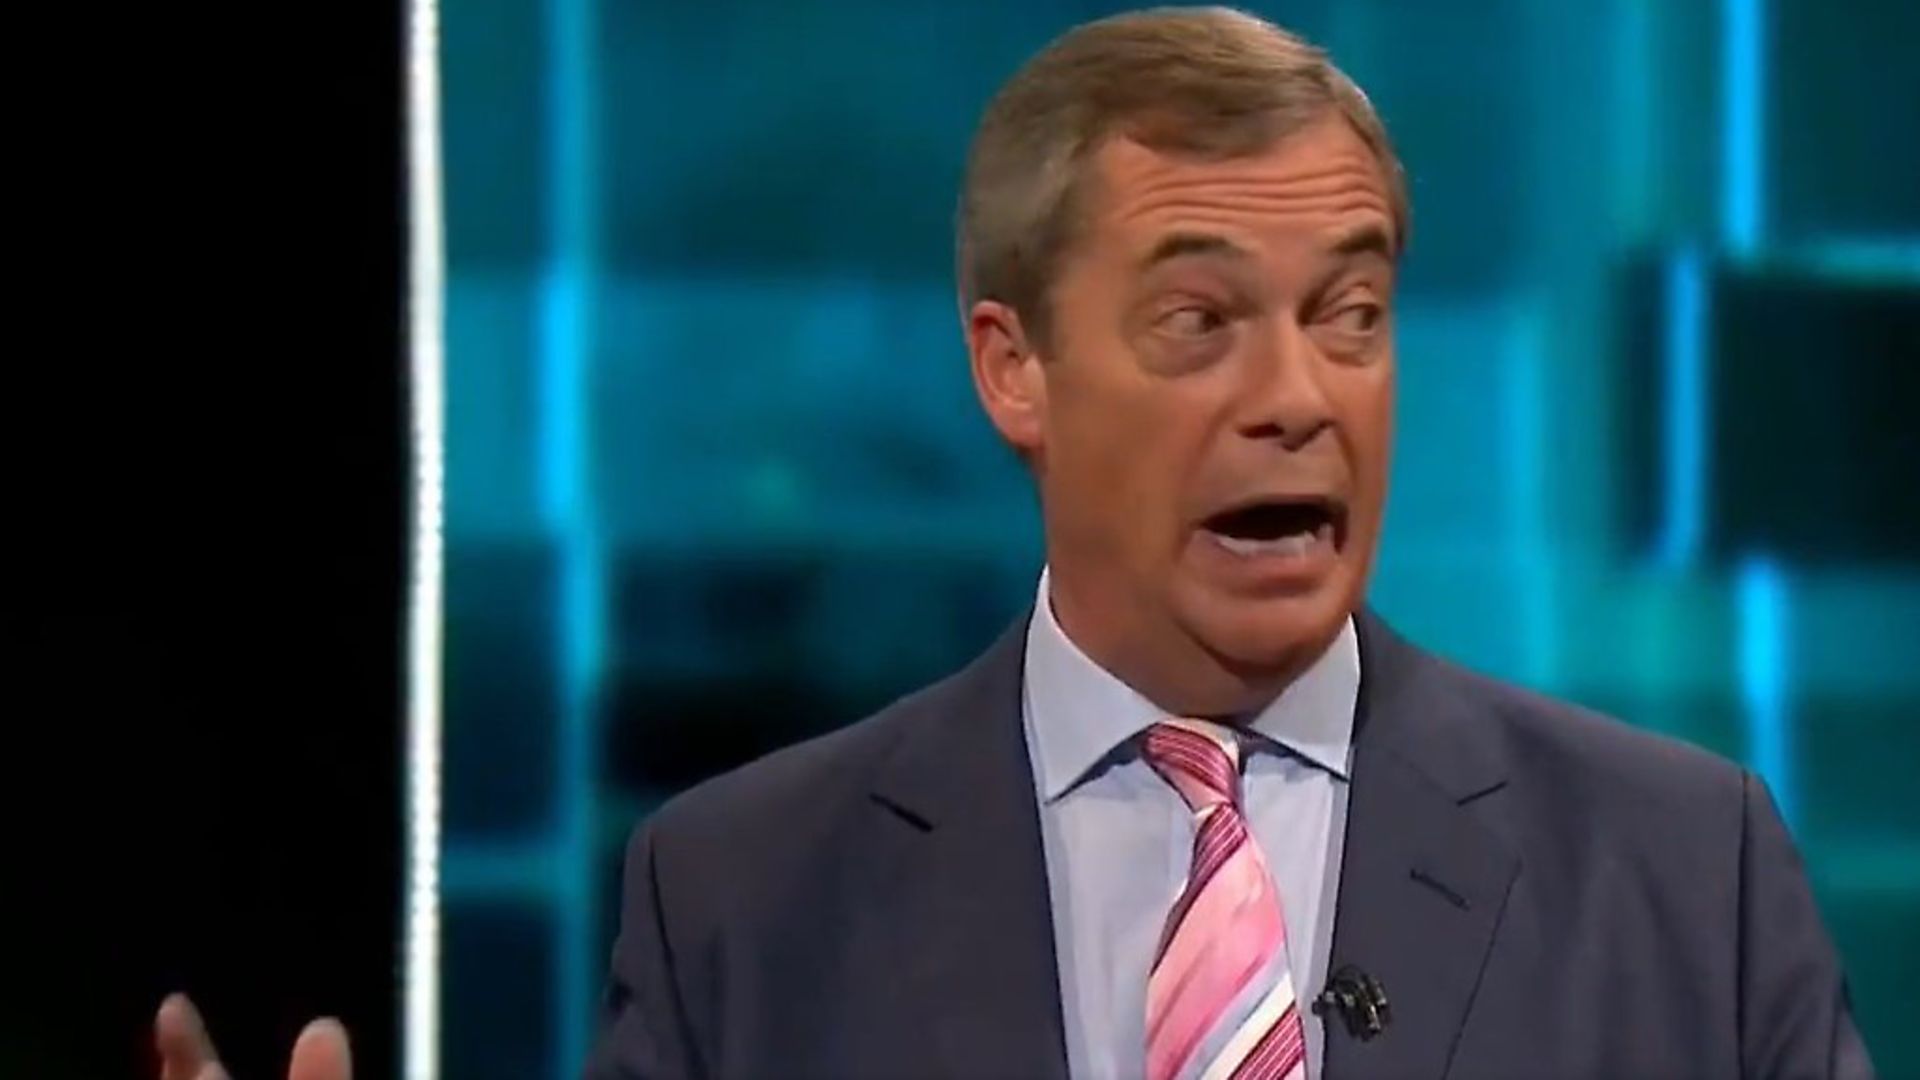 Farage denied he had ever talked about privatising the NHS on the ITV general election debate. Picture: ITV - Credit: ITV